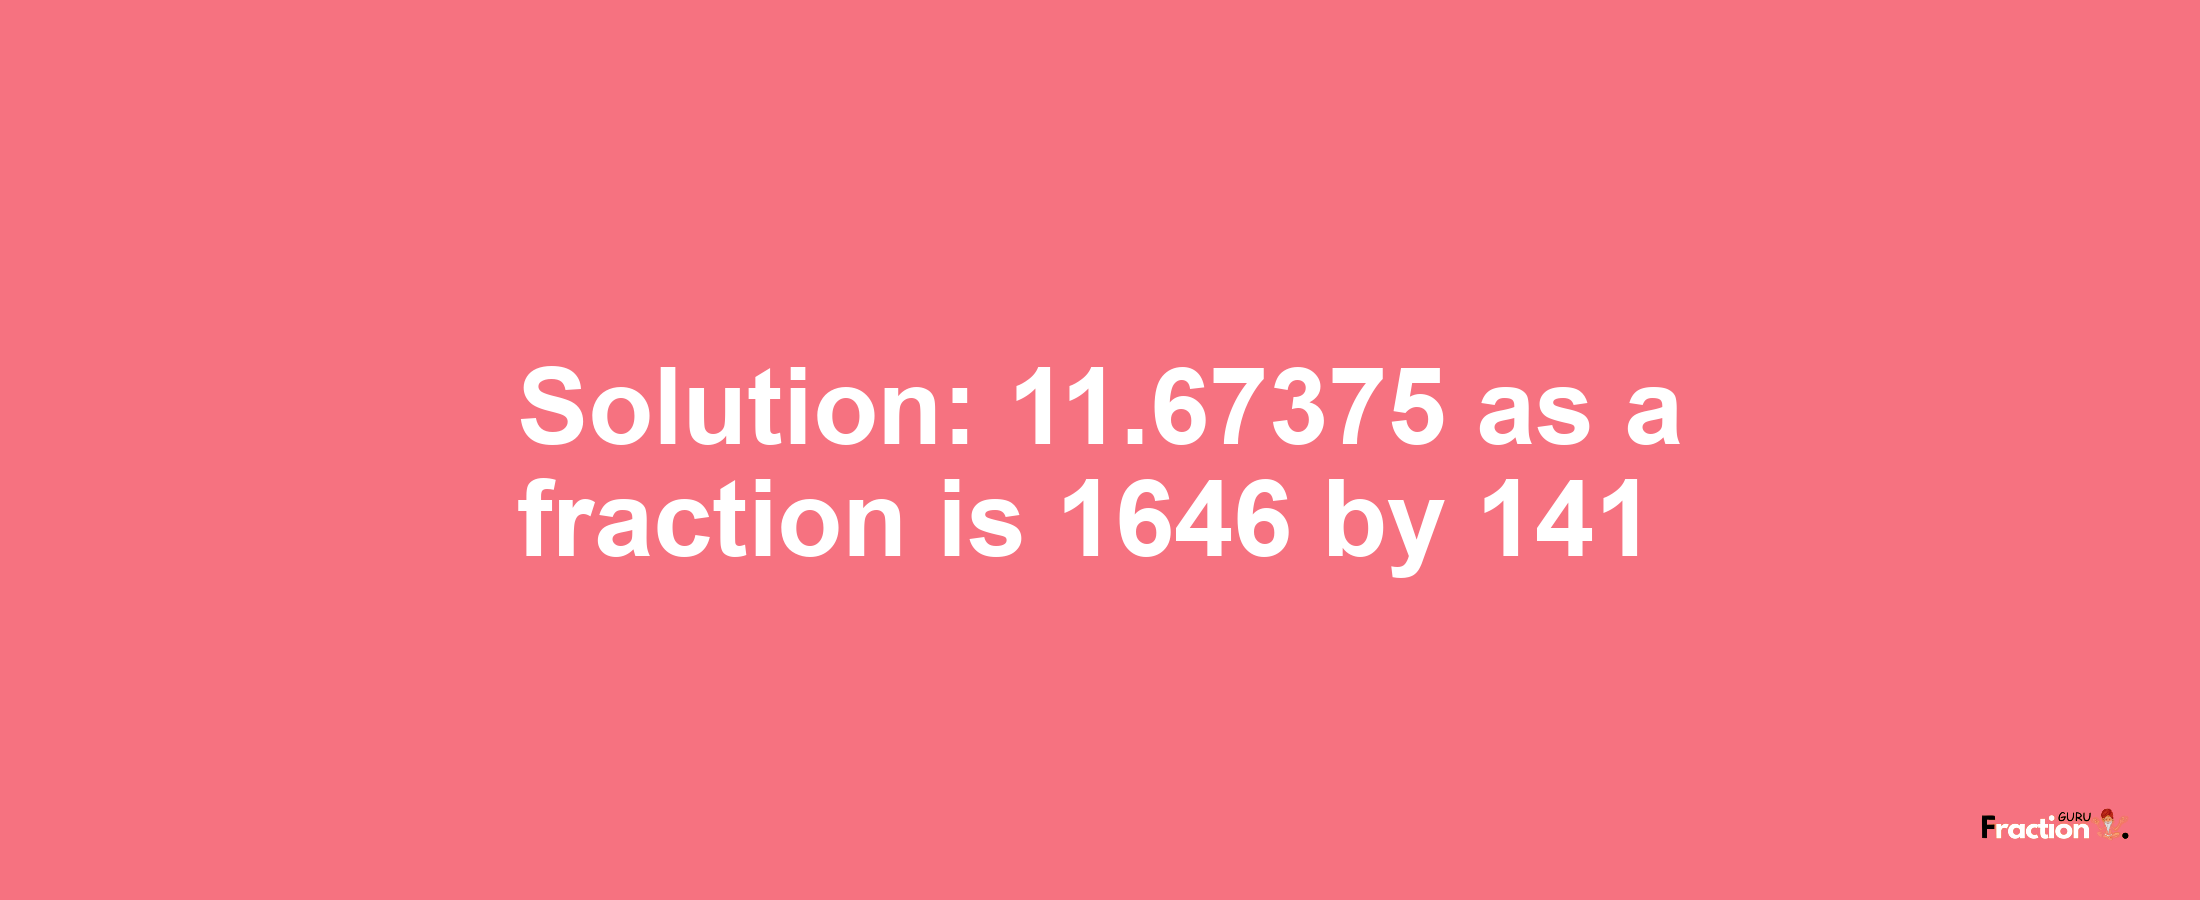 Solution:11.67375 as a fraction is 1646/141